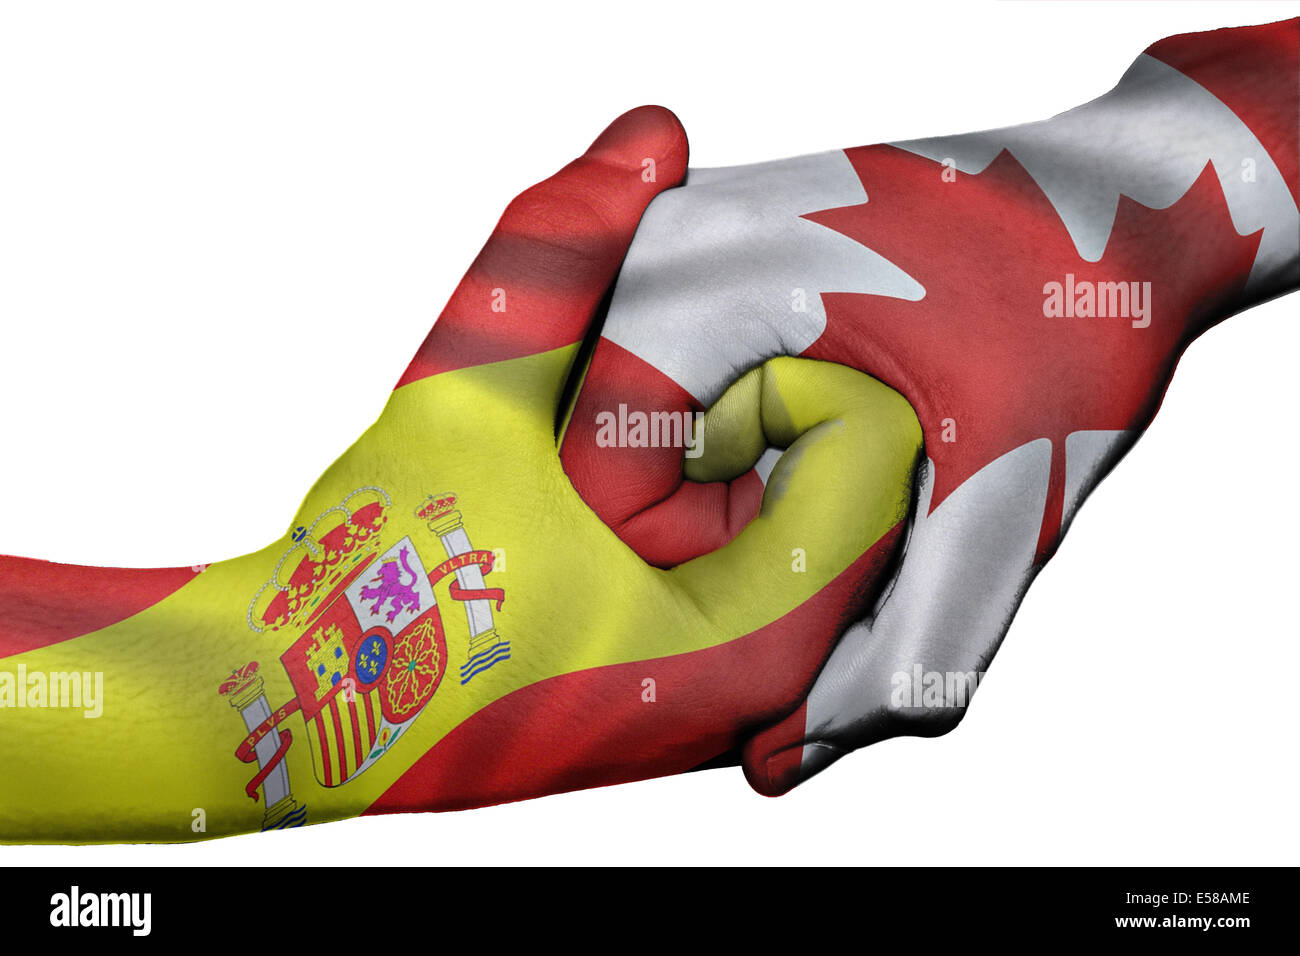 Diplomatic handshake between countries: flags of Spain and Canada overprinted the two hands Stock Photo